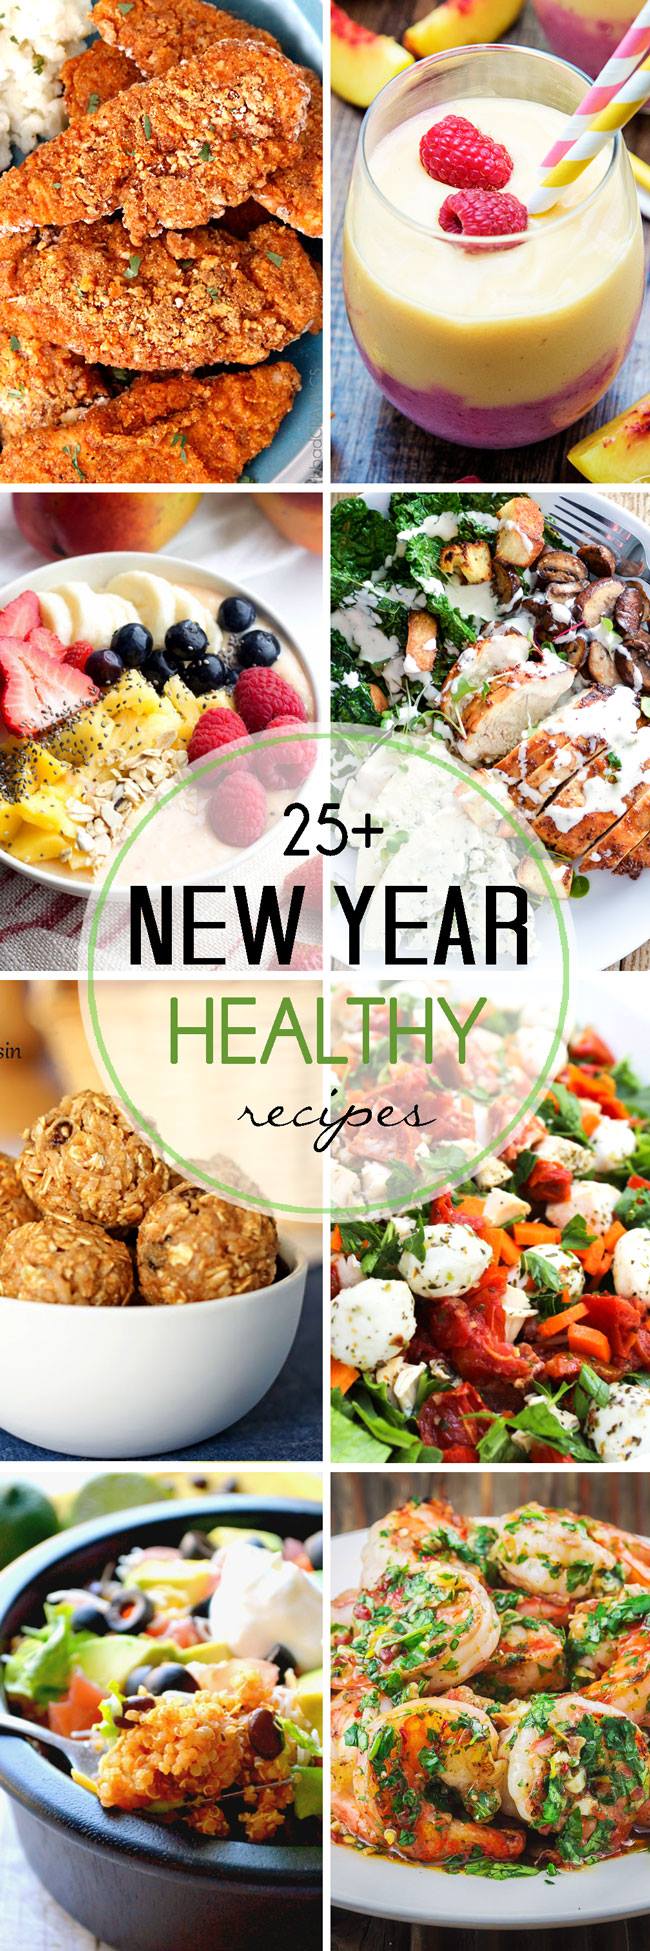 New Year Healthy recipes that will feed your health and taste buds! 